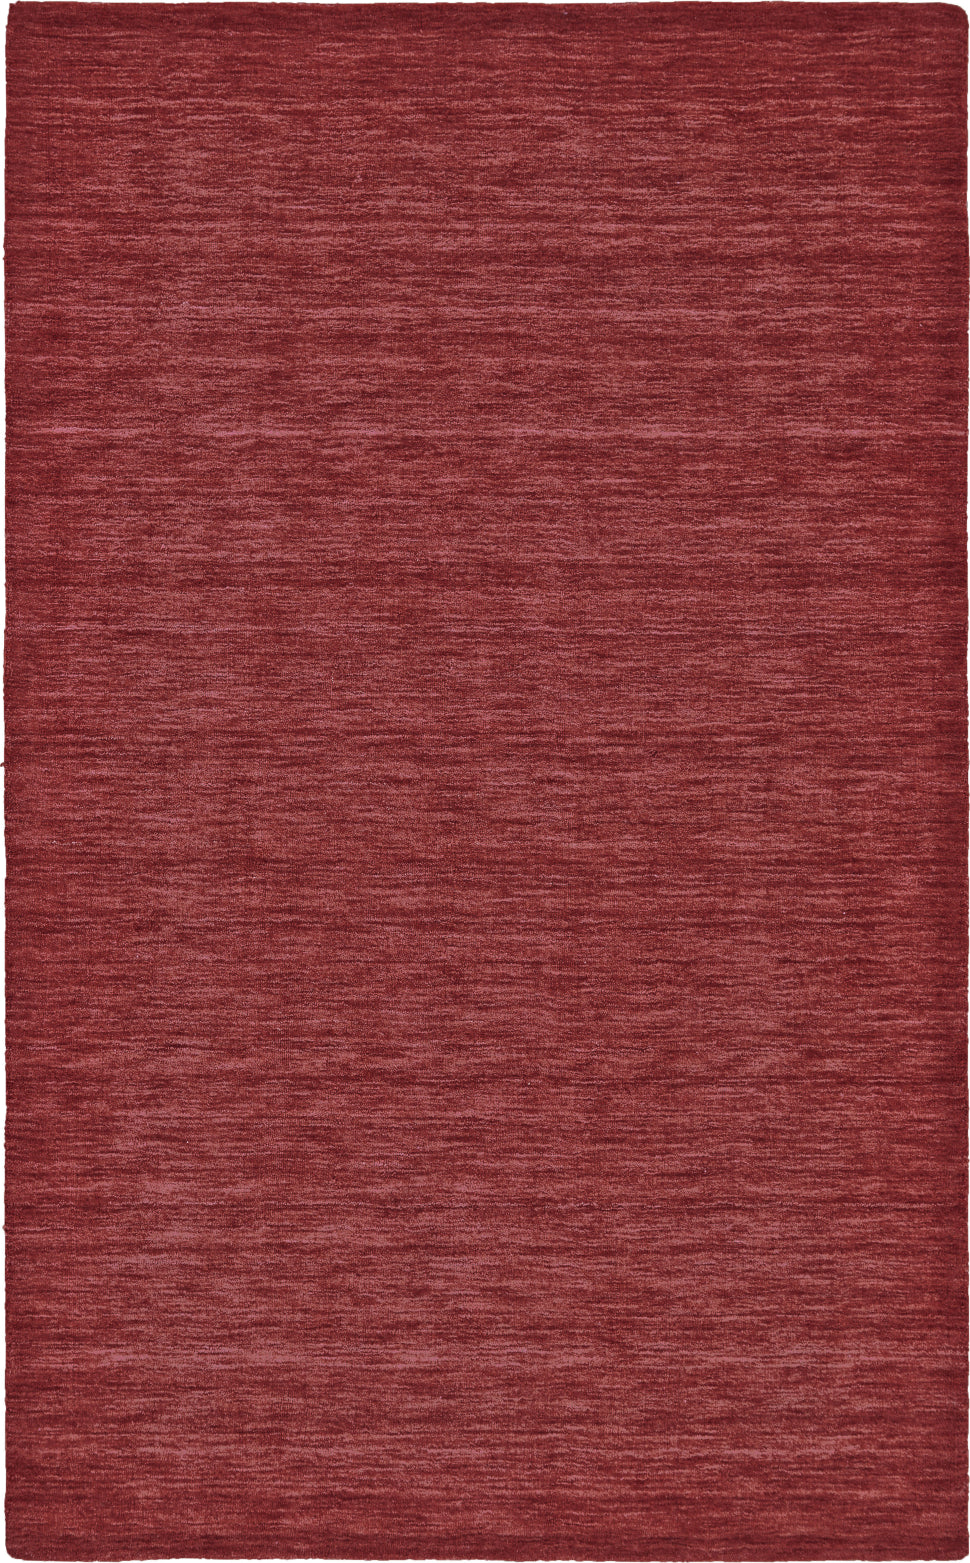 Feizy Luna 8049F Red Area Rug main image